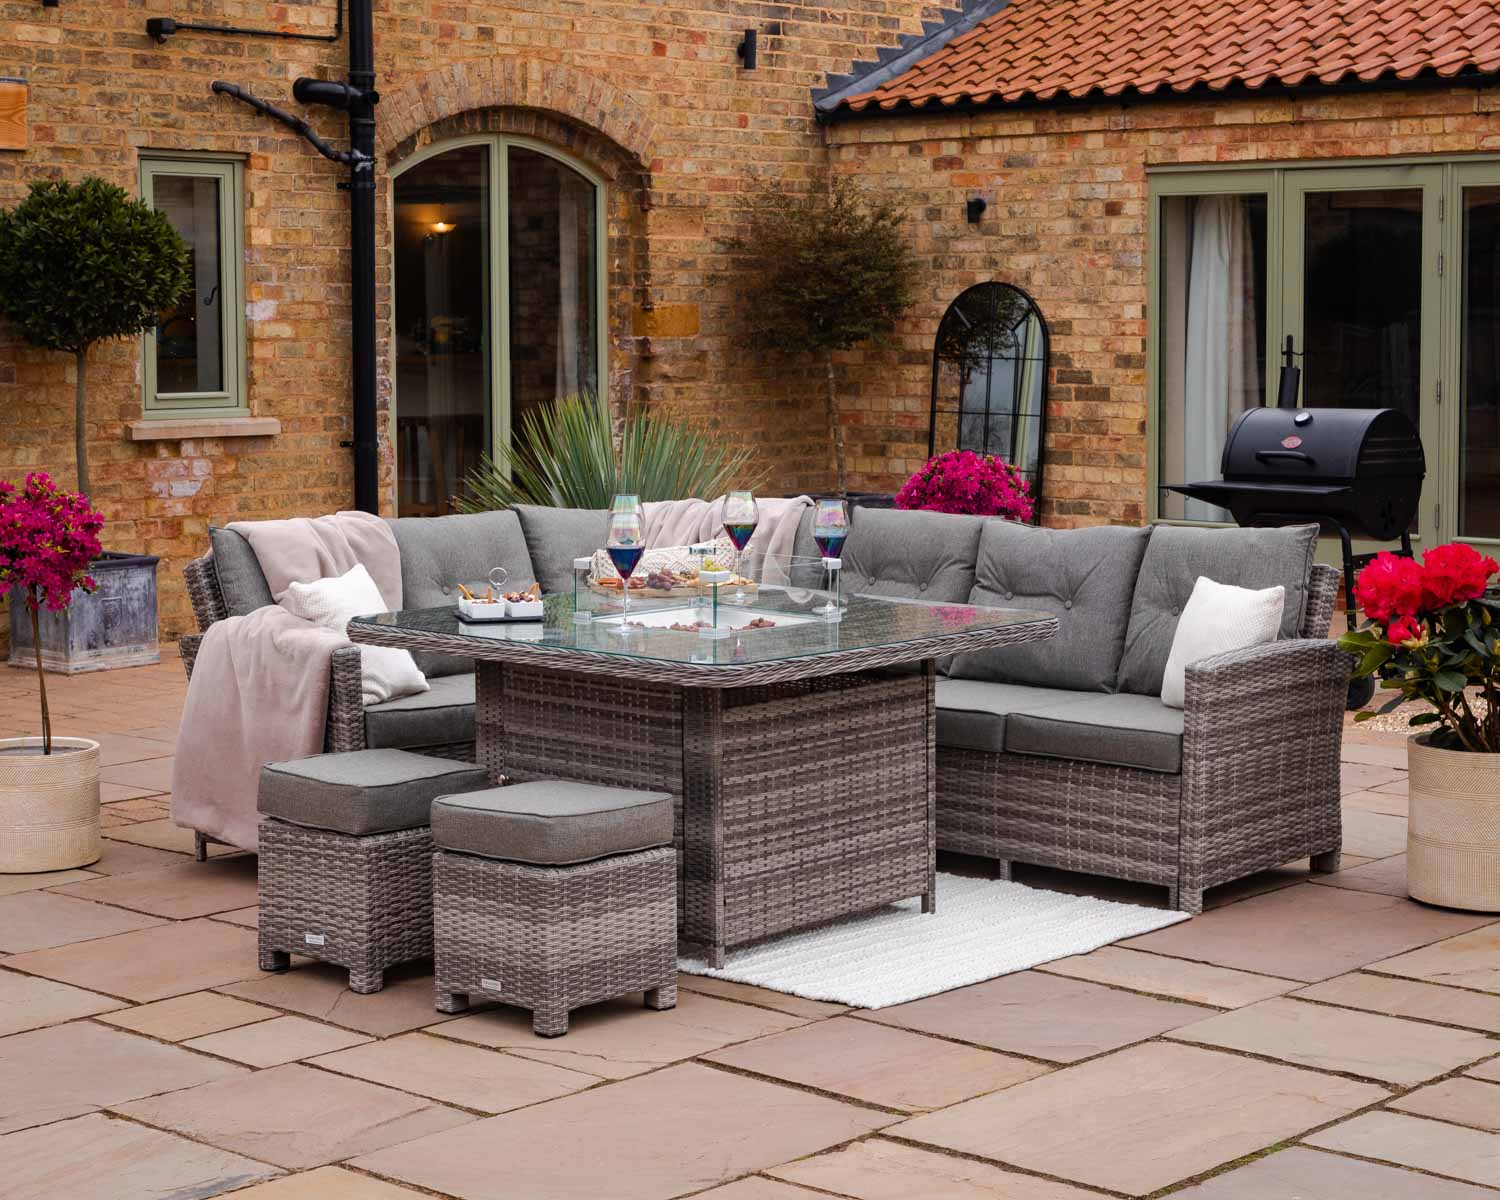 Sorrento Rattan Garden Corner Dining Set With Square Fire Pit Table In Willow